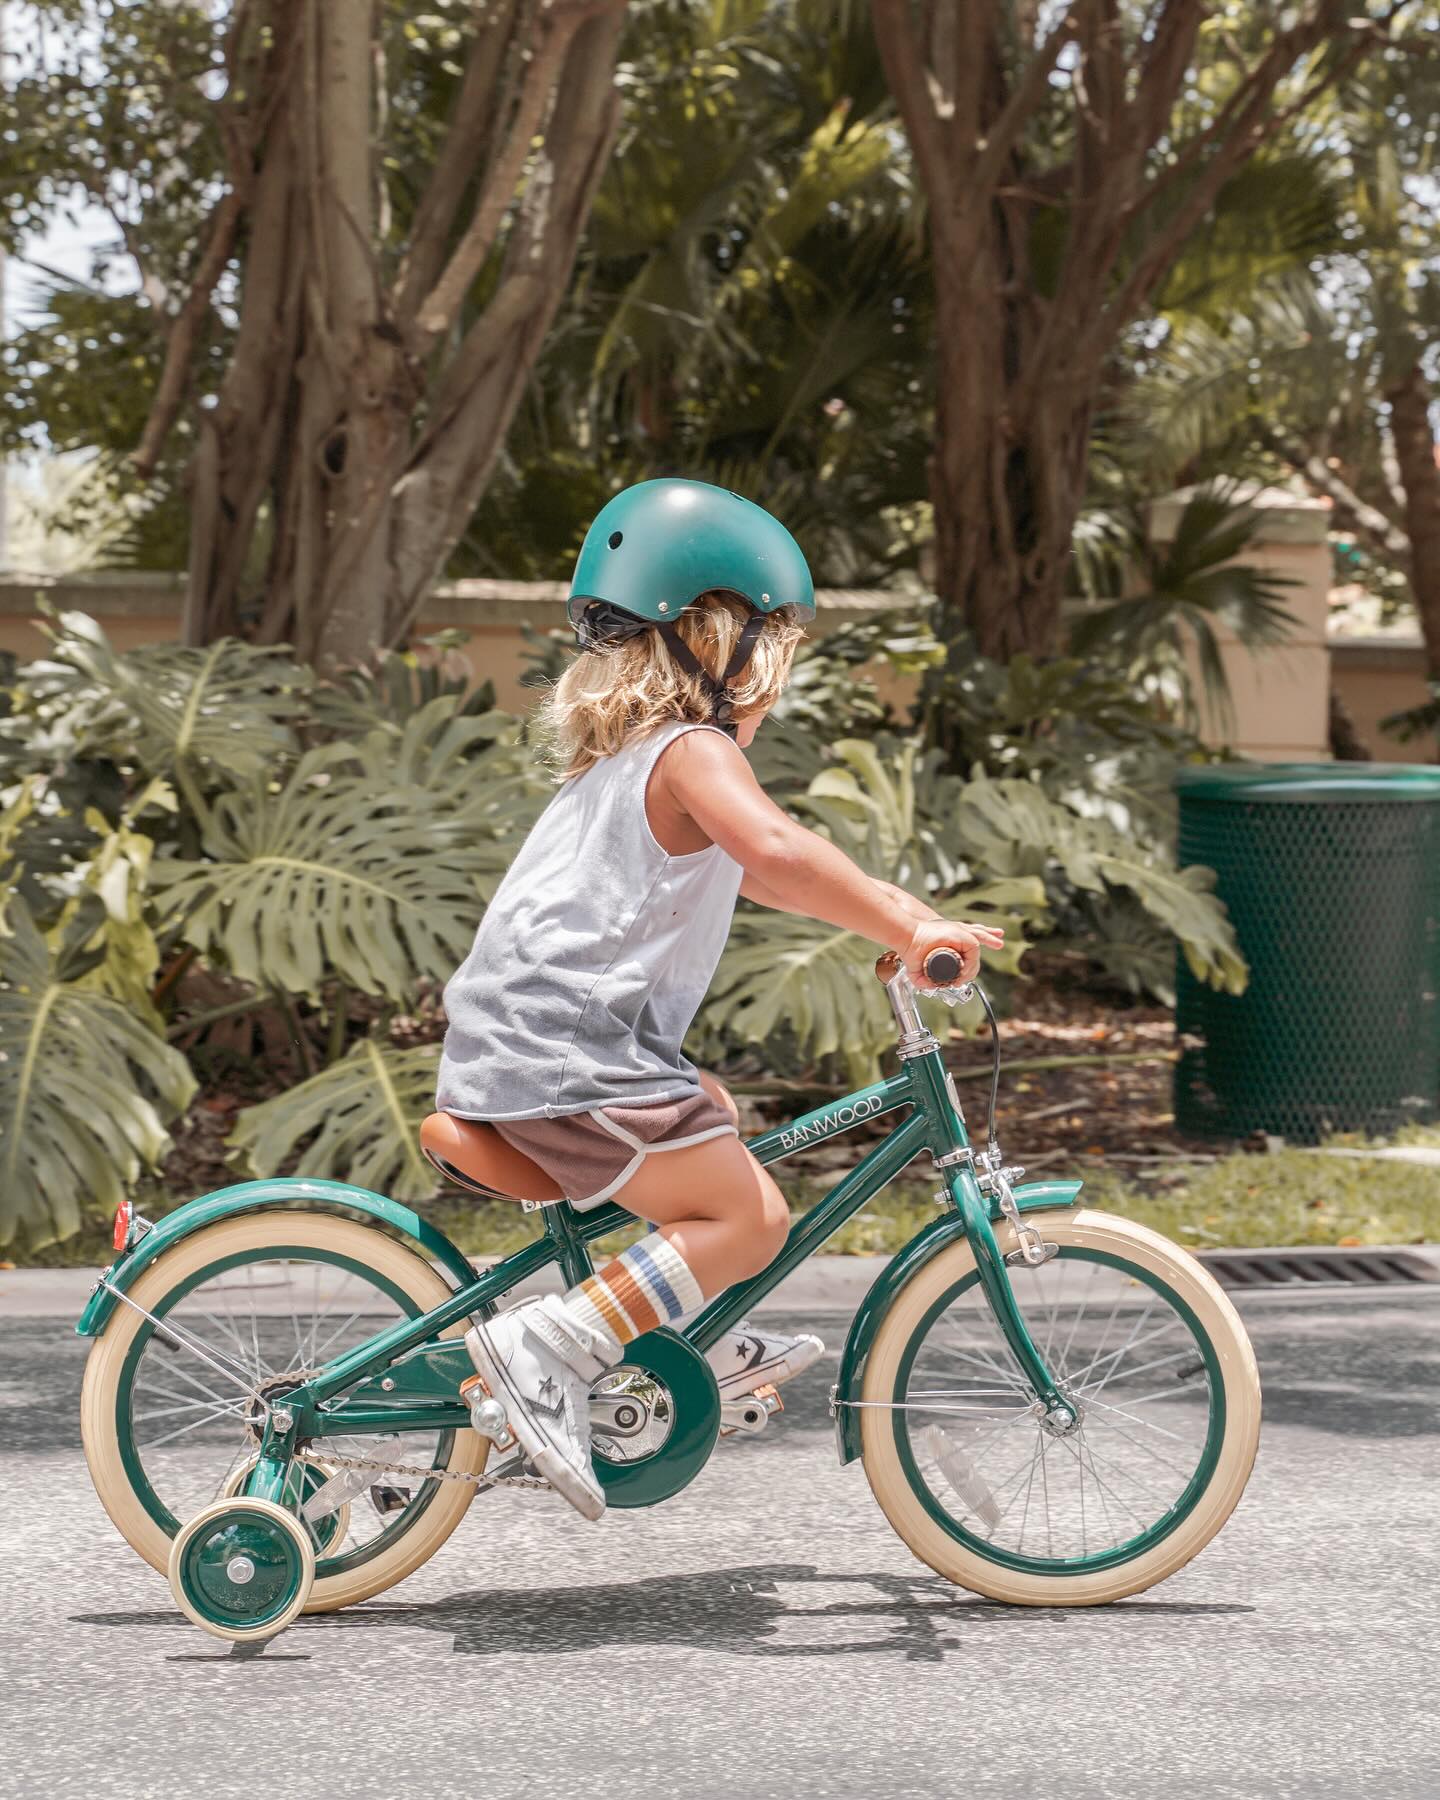 CLASSIC BIKE - GREENRetro inspired and classic designed frame with rosewood pedals. Comes with training wheels. Suitable for kids 4+Available at #banwood.com